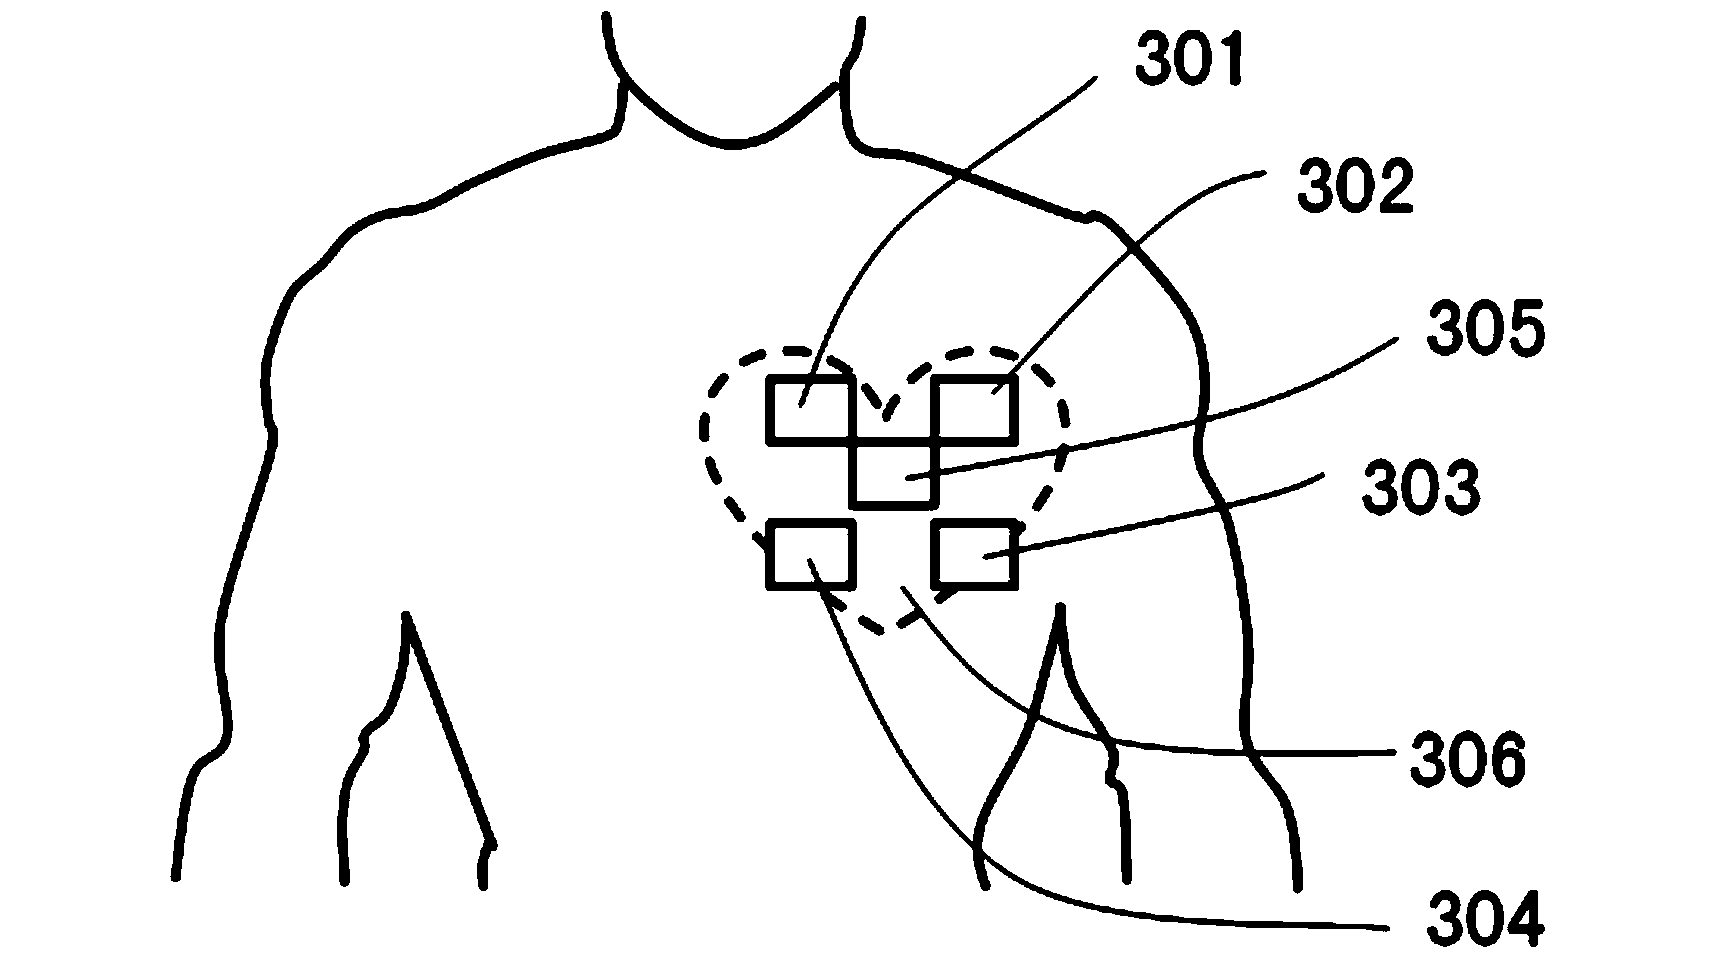 System for identifying and diagnosing rheumatic heart disease based on sound sensors and diagnostic method